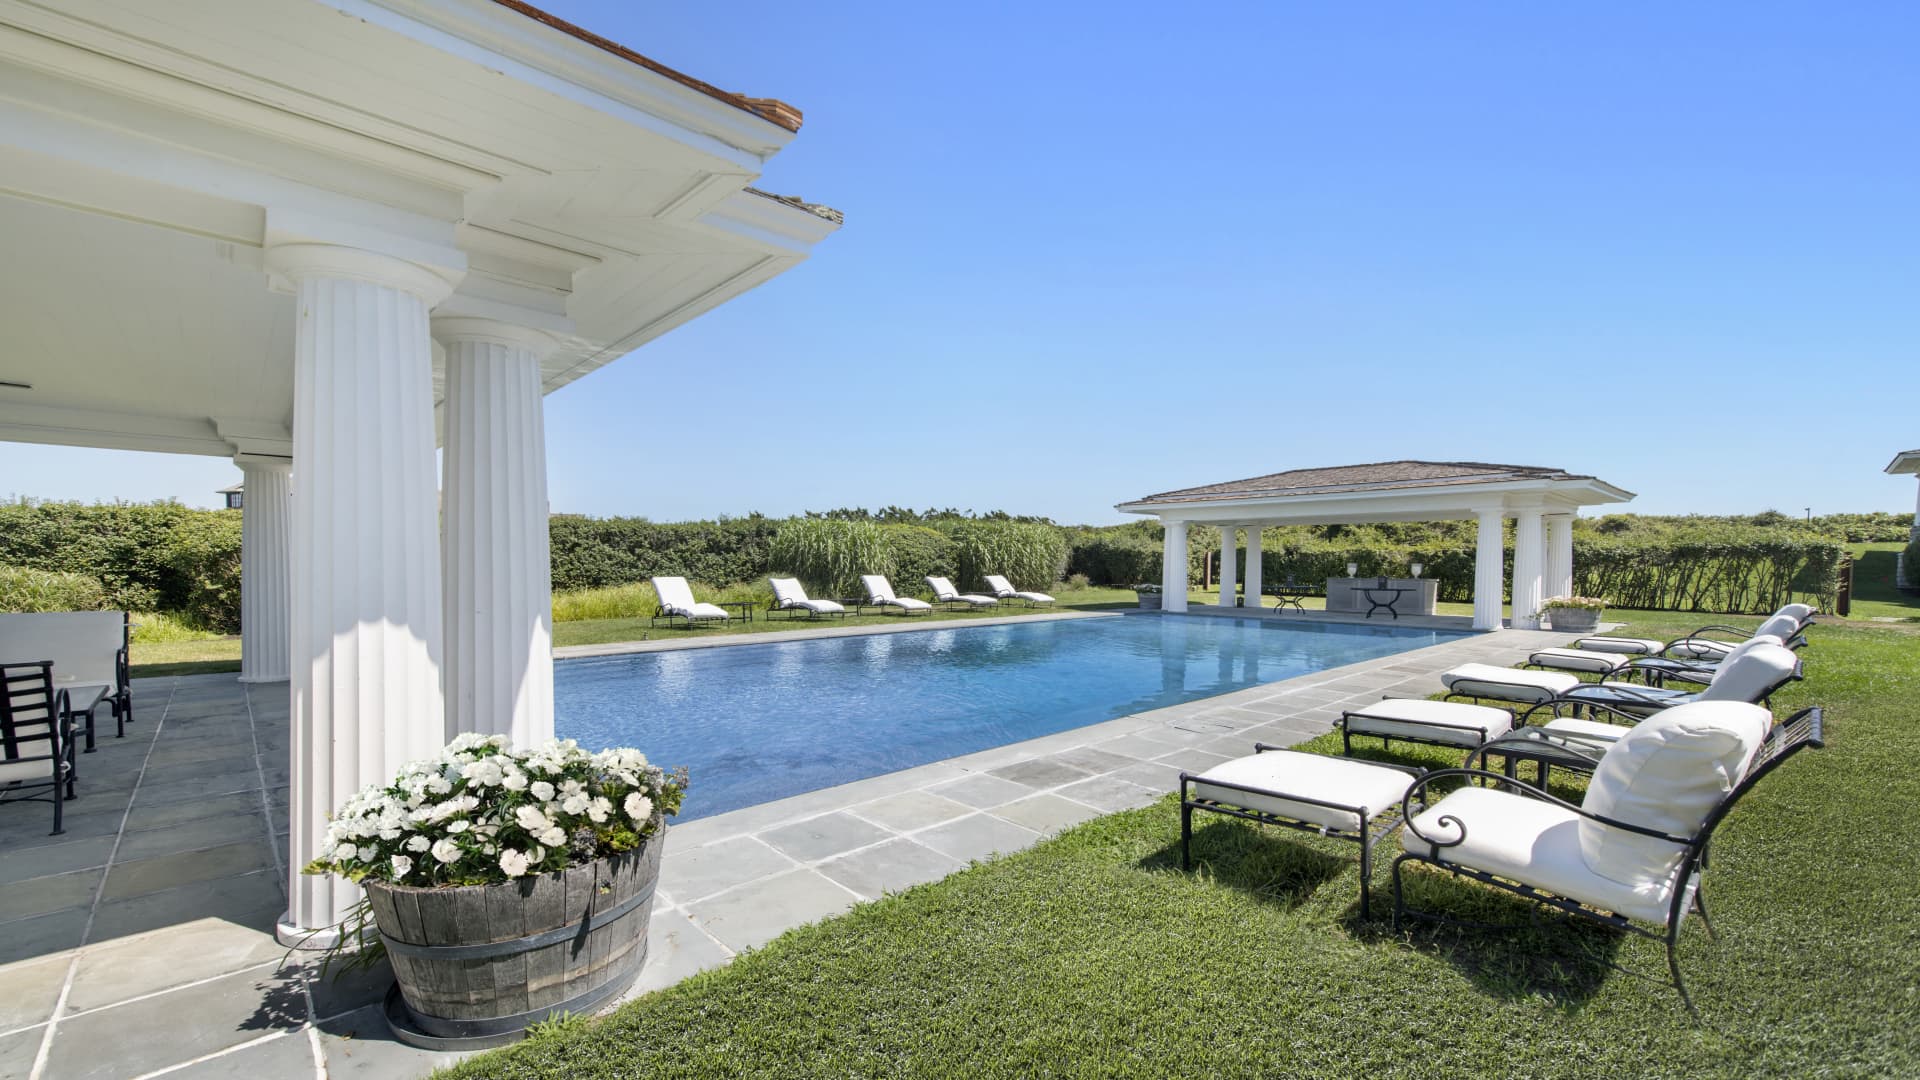 The main home's swimming pool is flanked by two bars and white columns.